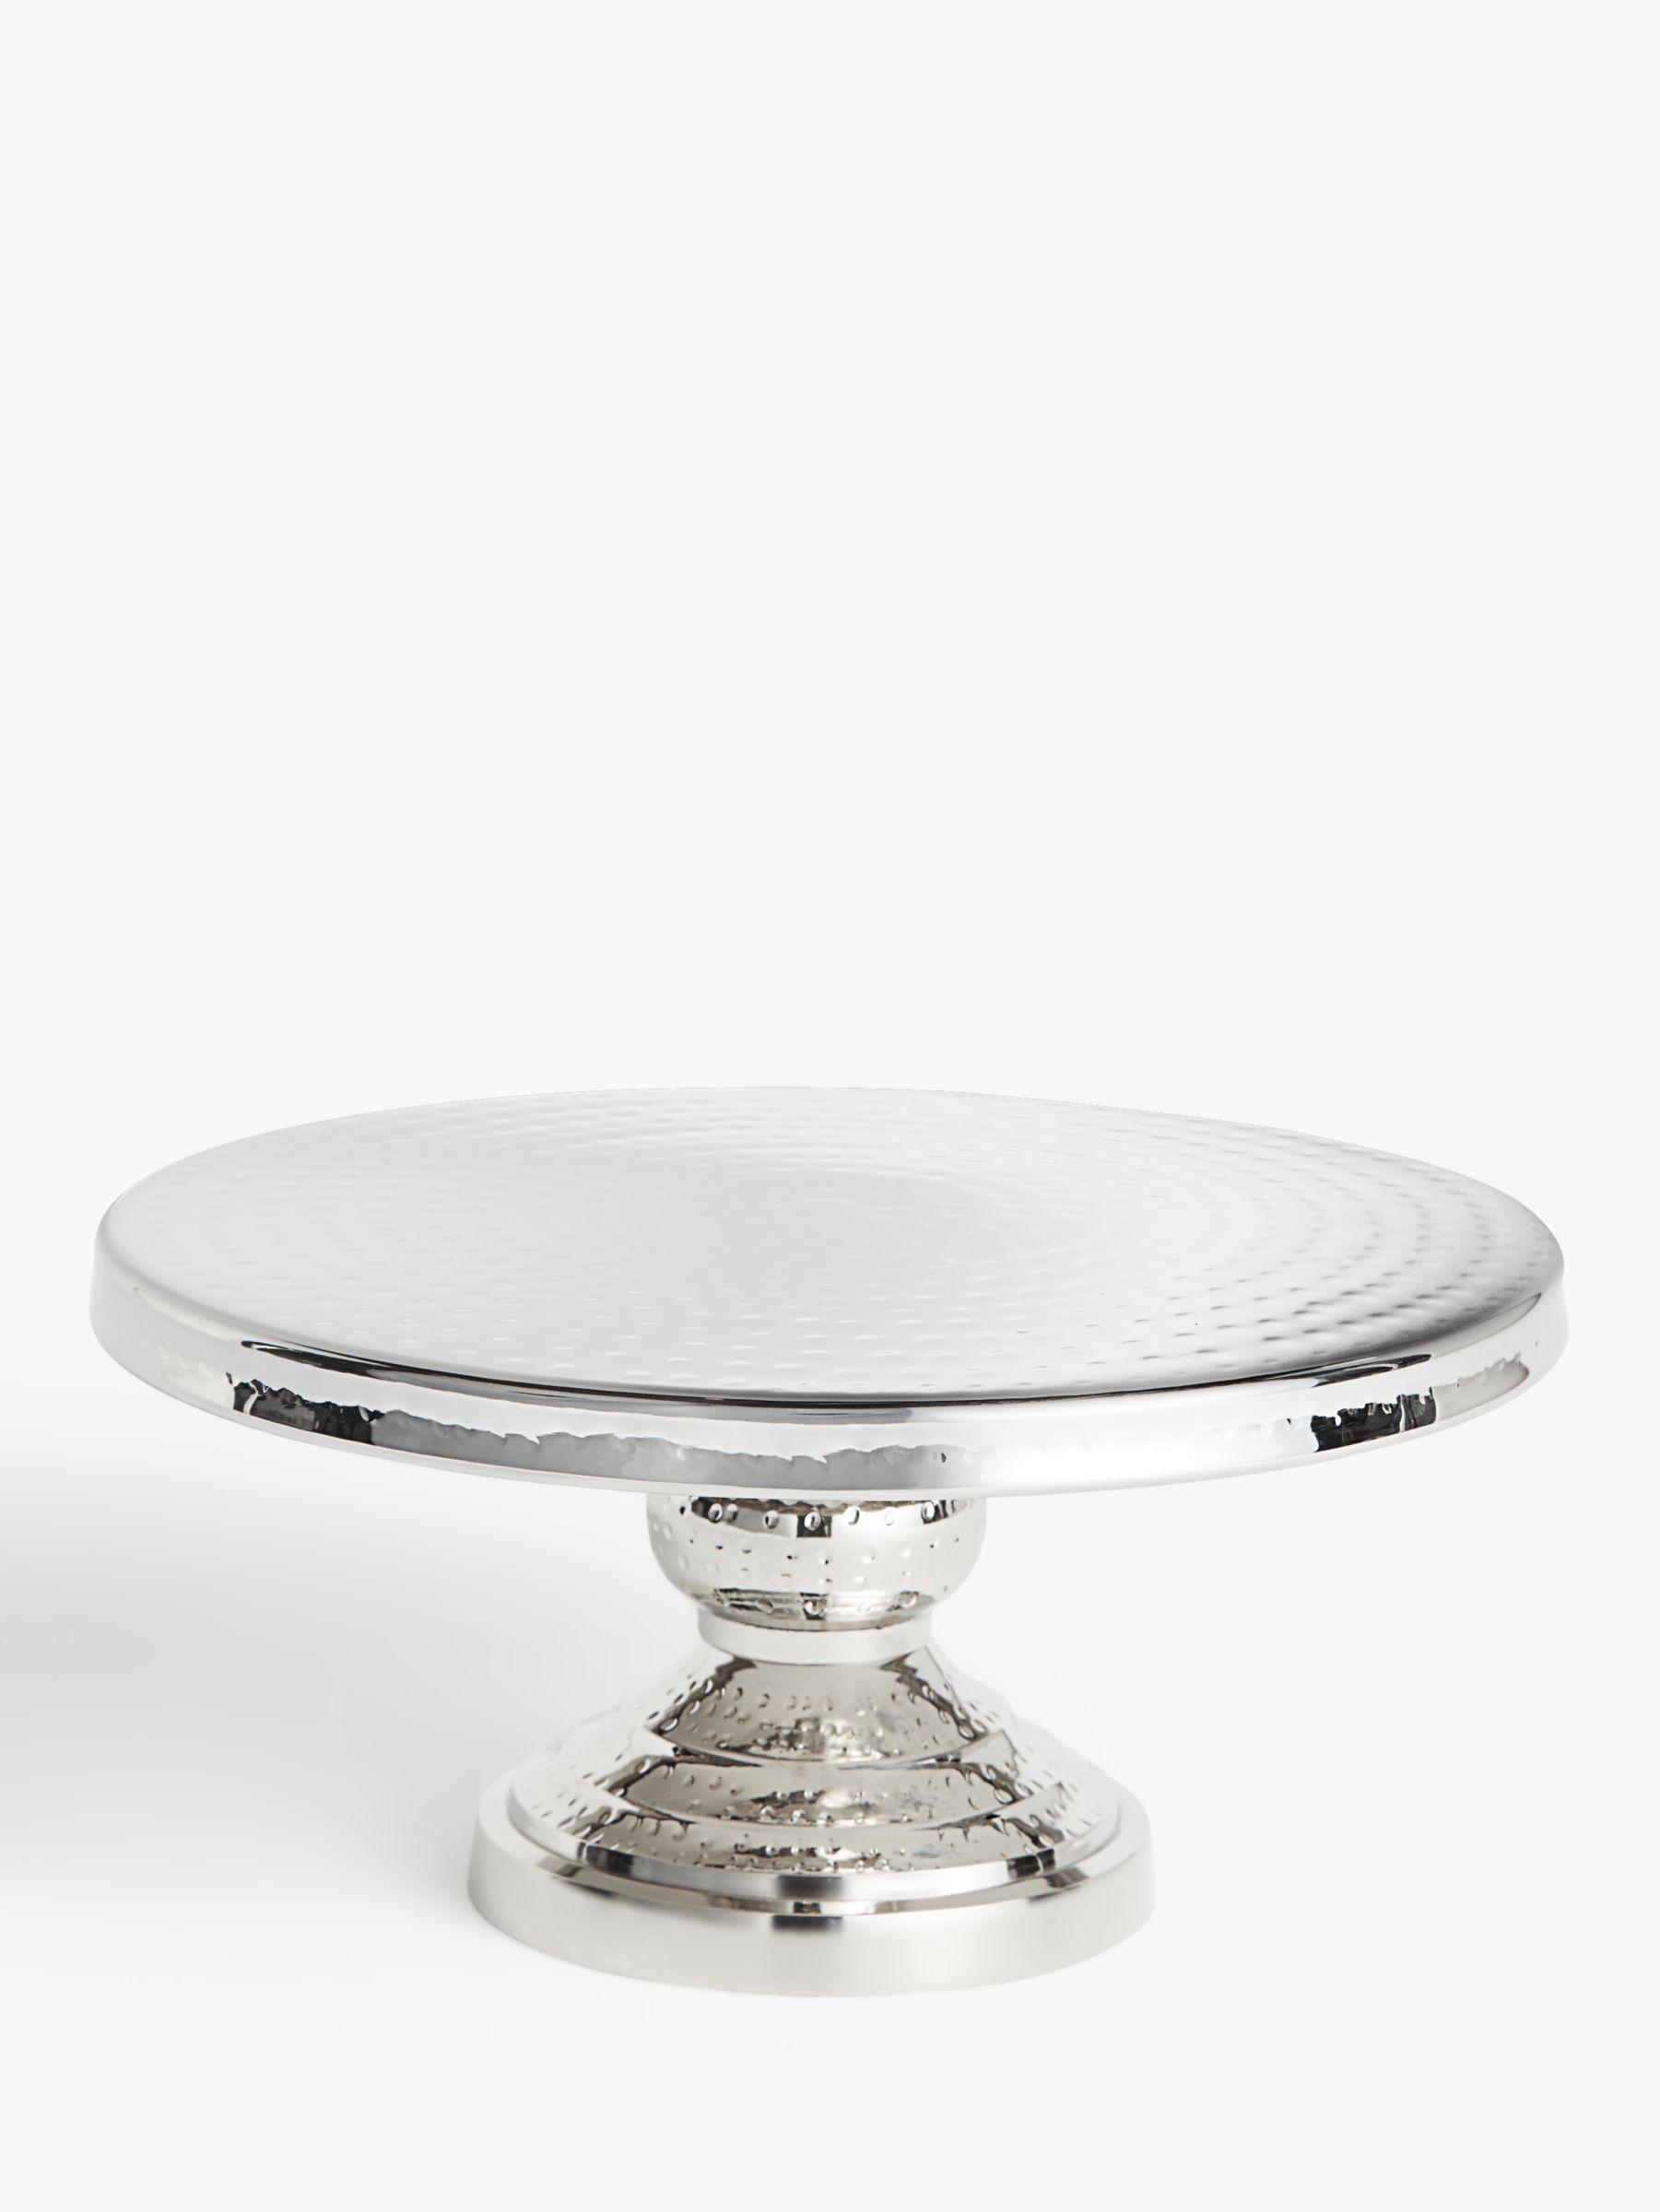 John Lewis & Partners Hammered Stainless Steel Cake Stand, Silver